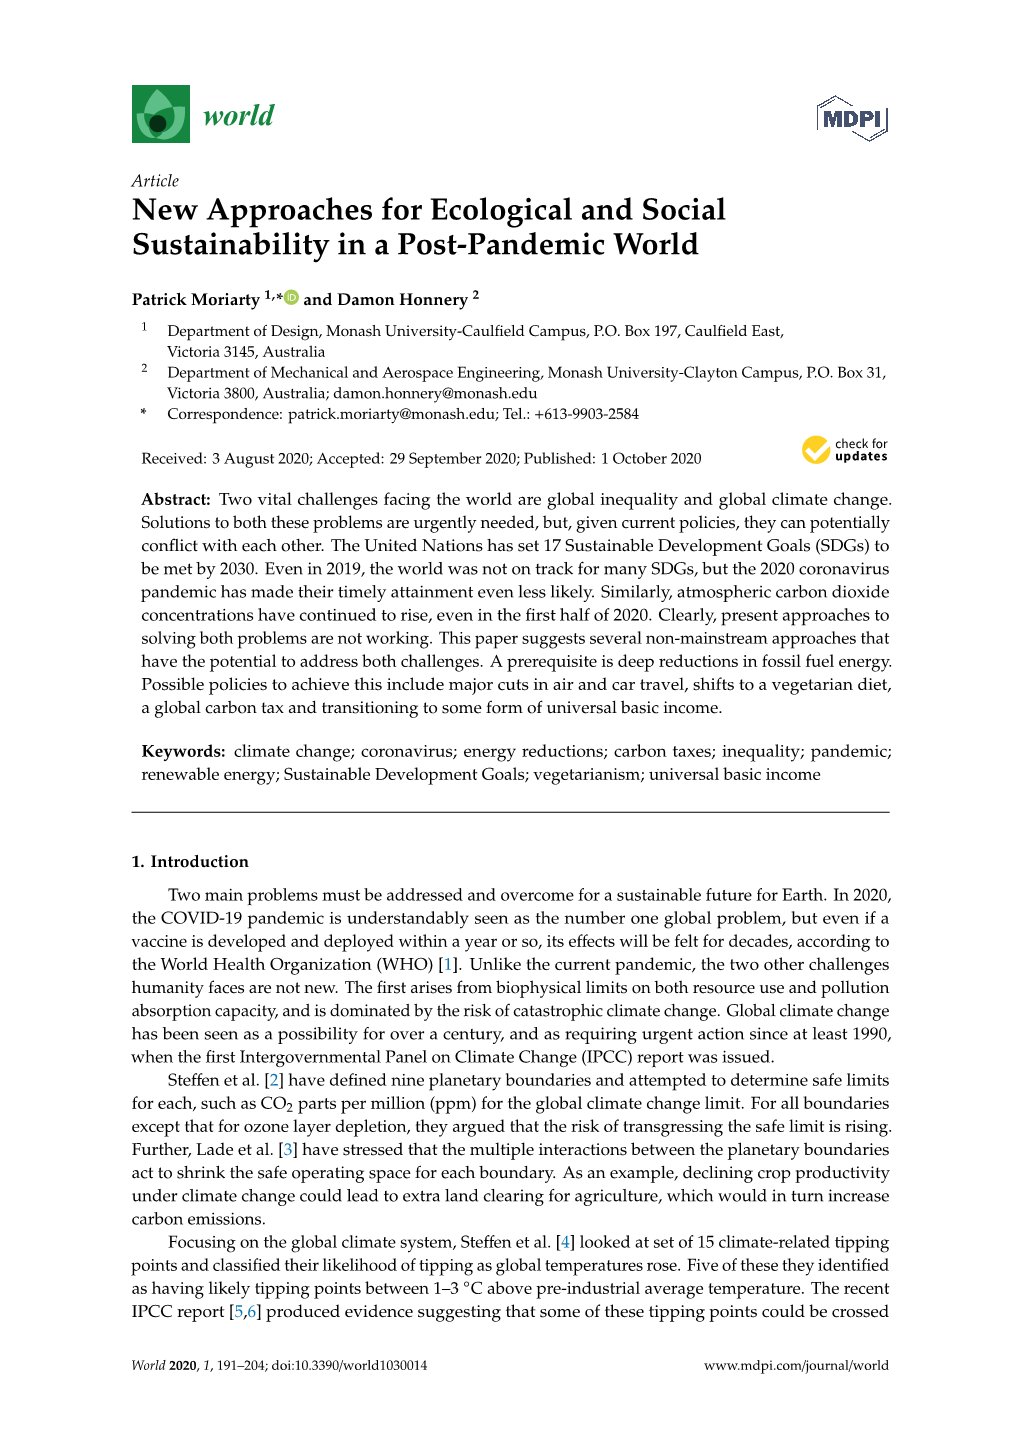 New Approaches for Ecological and Social Sustainability in a Post-Pandemic World